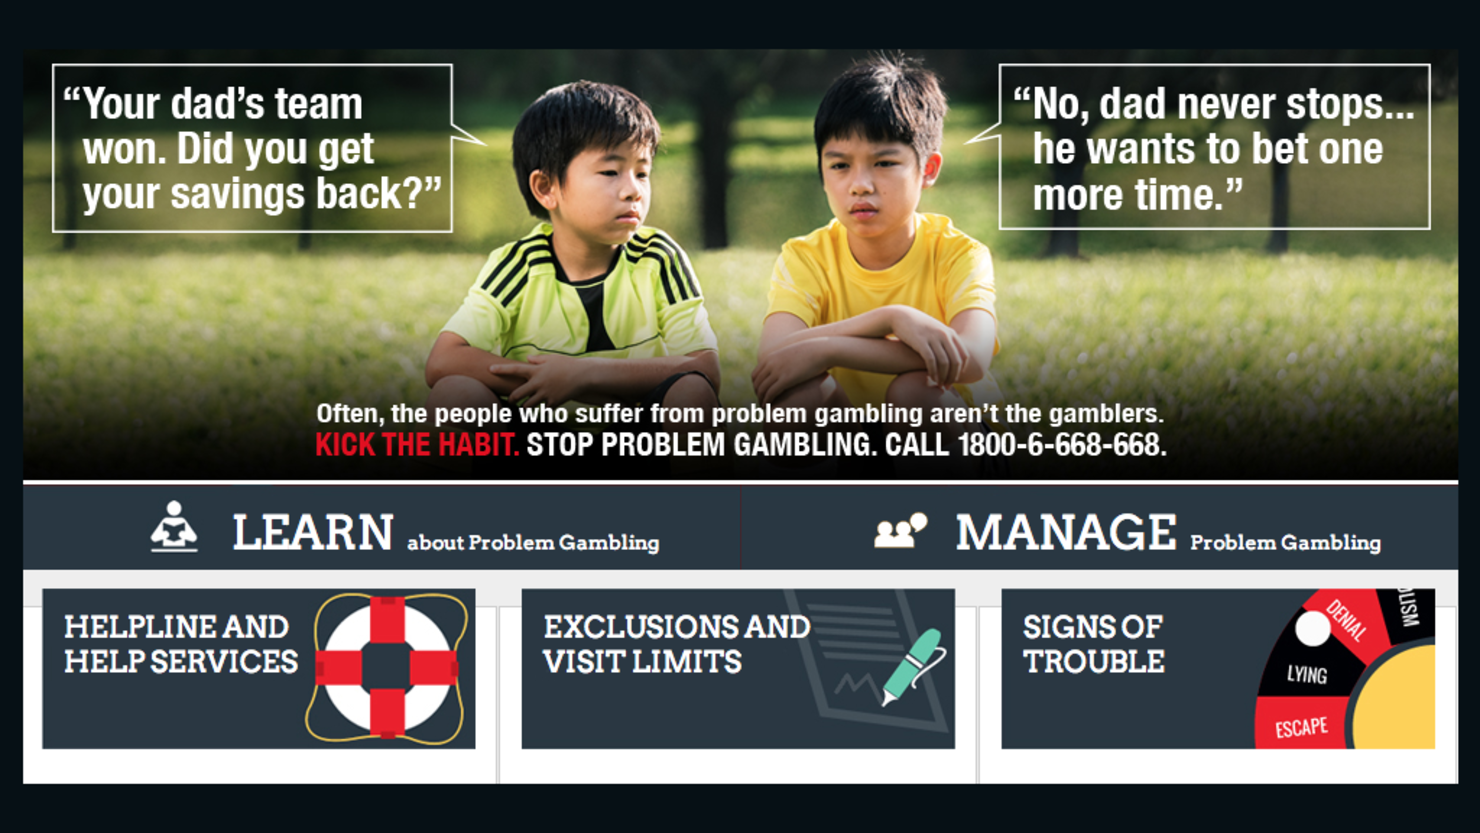 A screenshot of the National Council on Problem Gambling's website shows the organization's new ad.